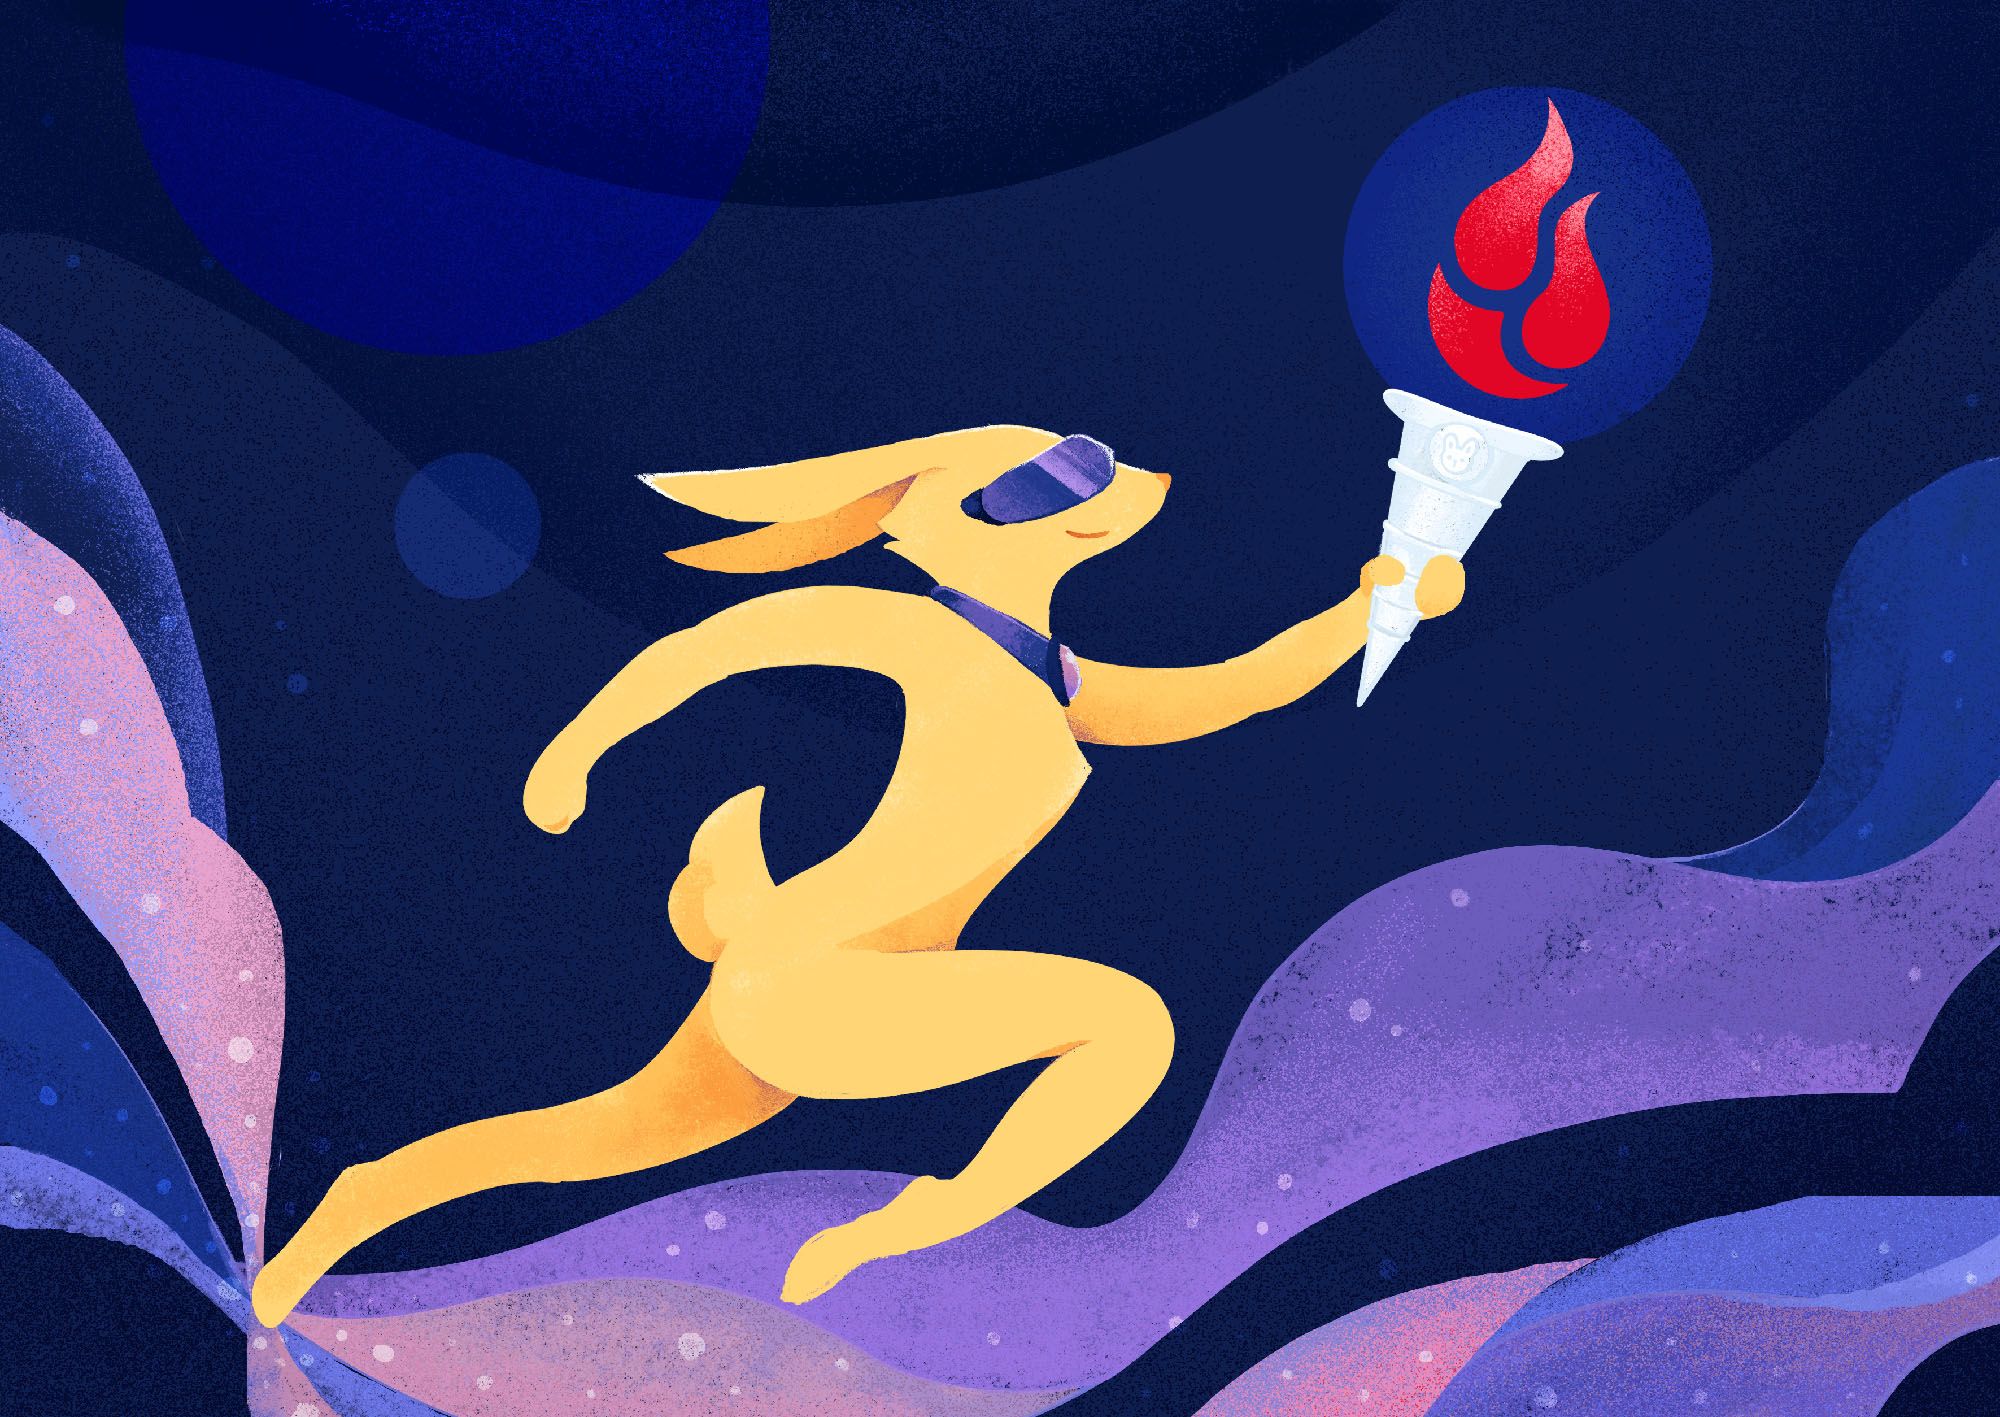 bunny.net partners with Backblaze to help reduce egress fees and supercharge content!